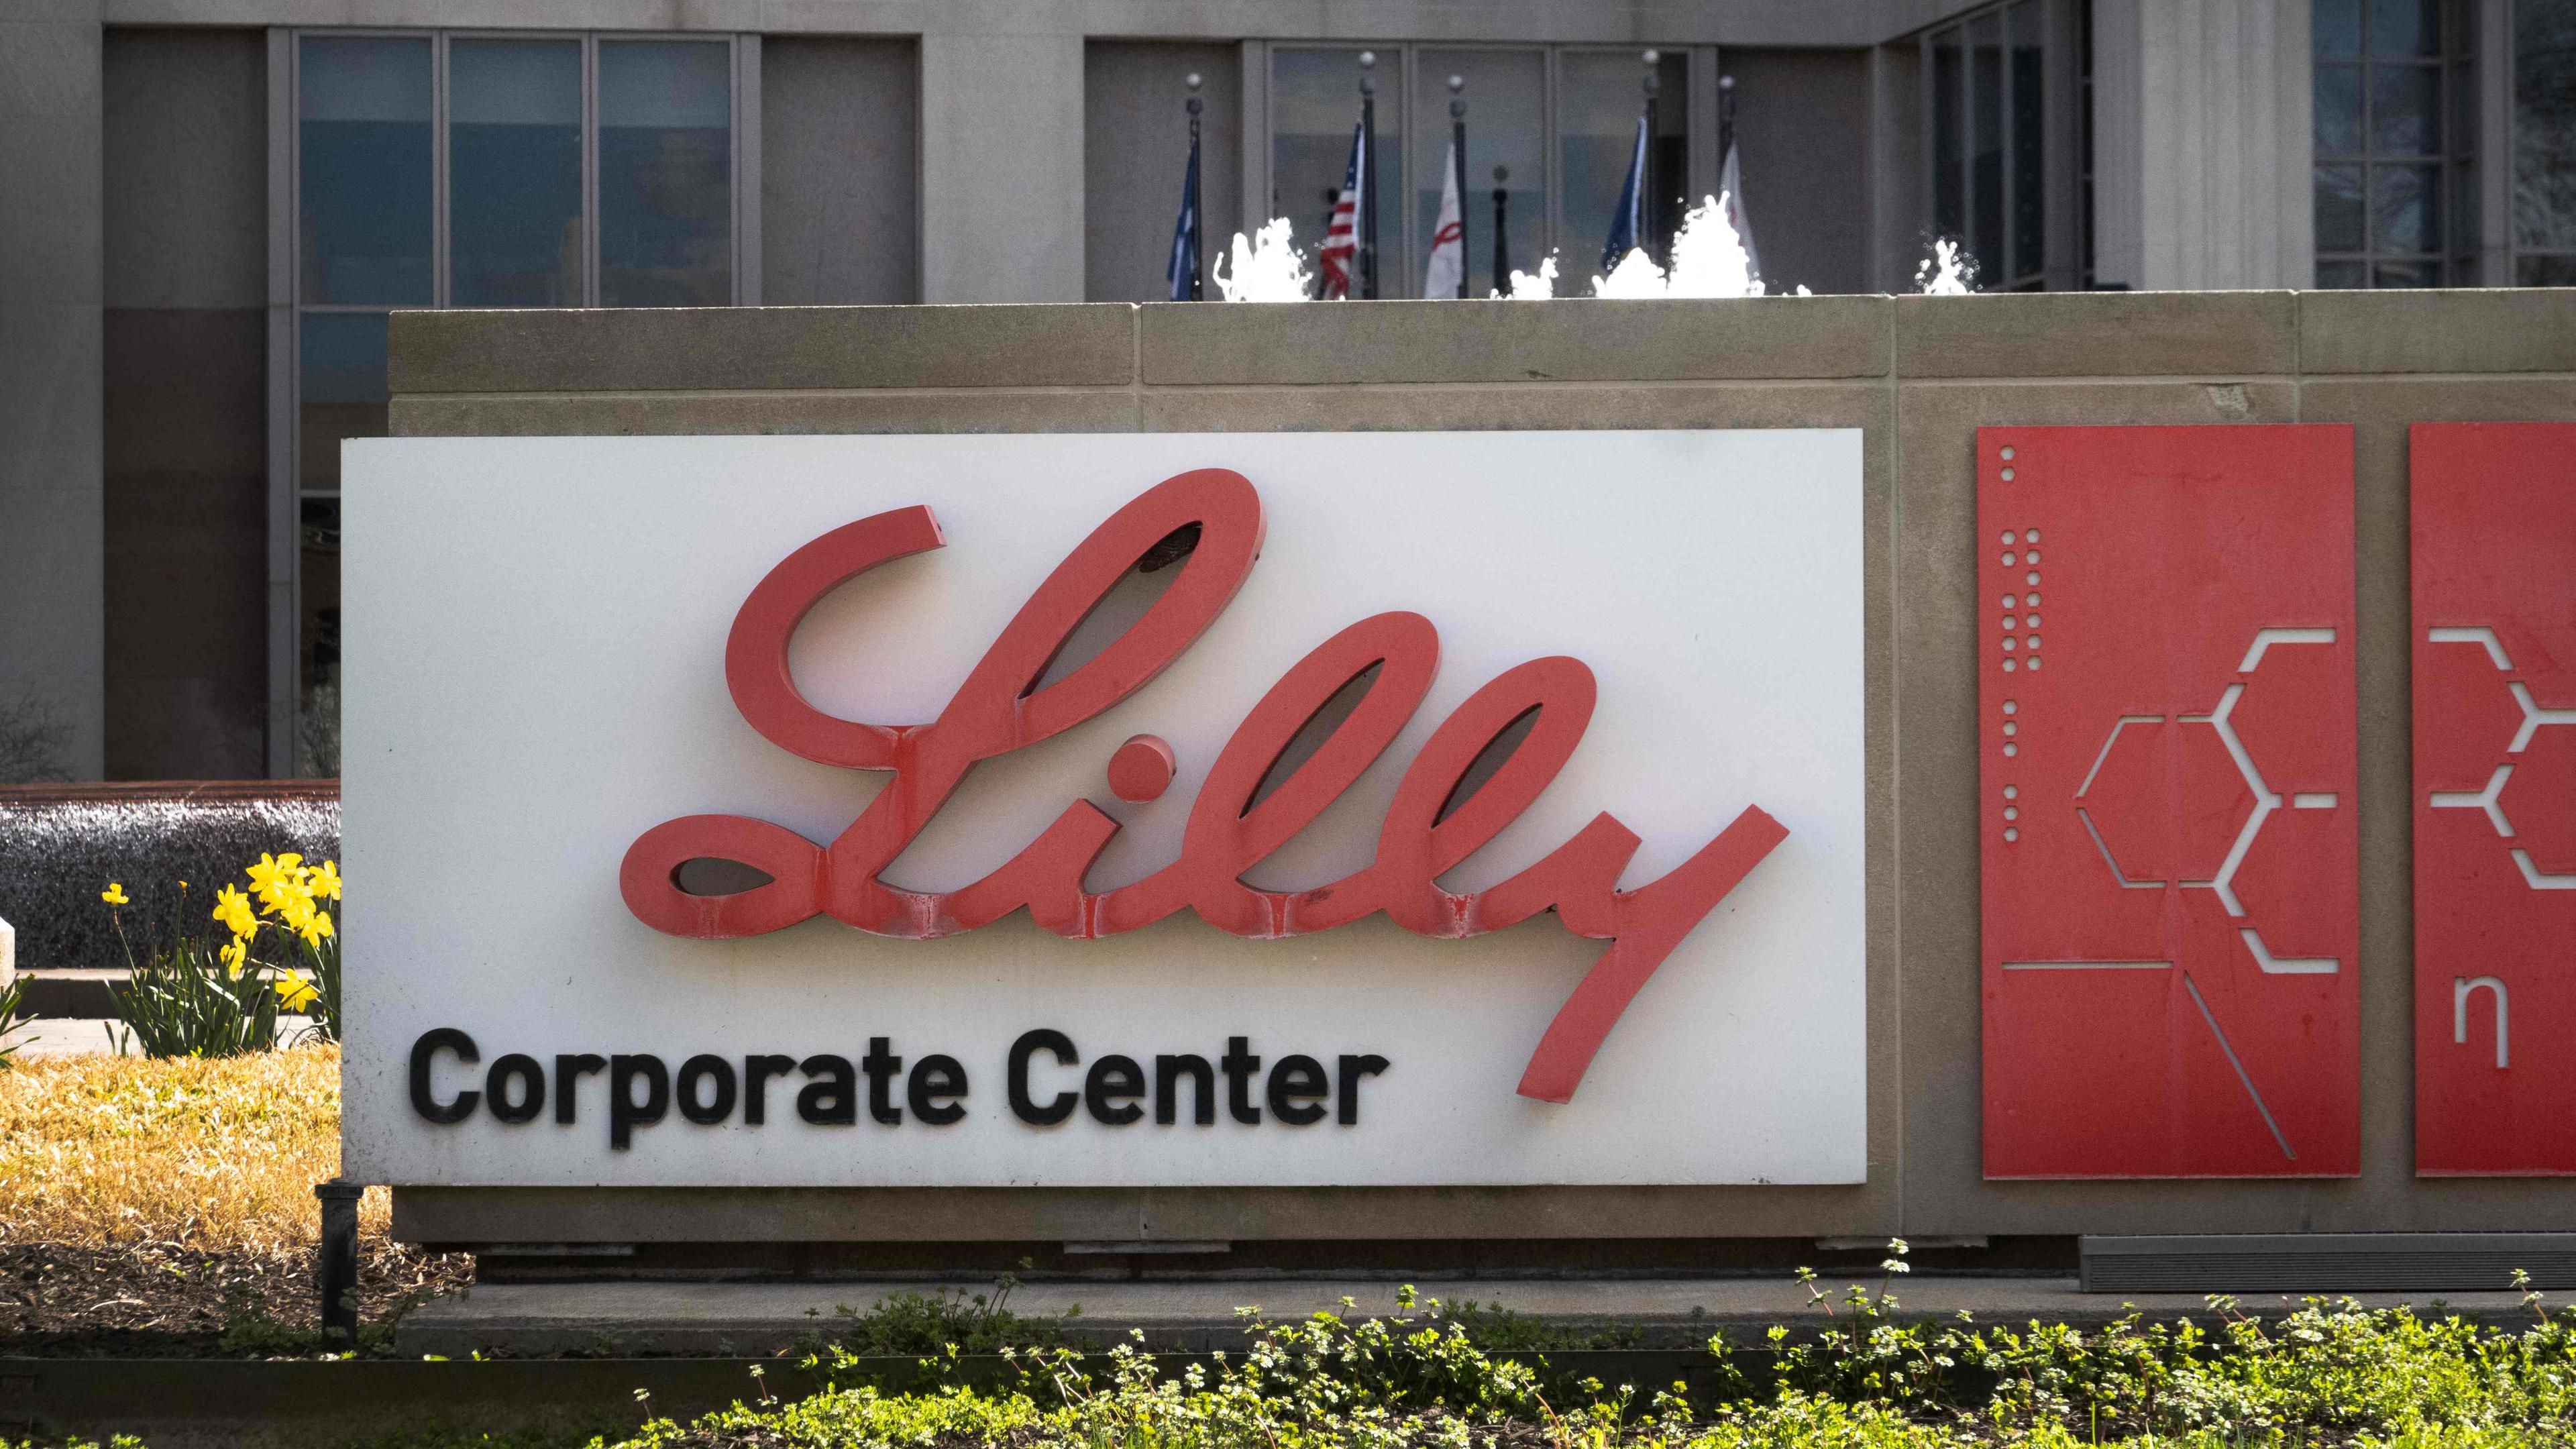 Hauptquartier des US-Pharmakonzerns Eli Lilly in Indianapolis